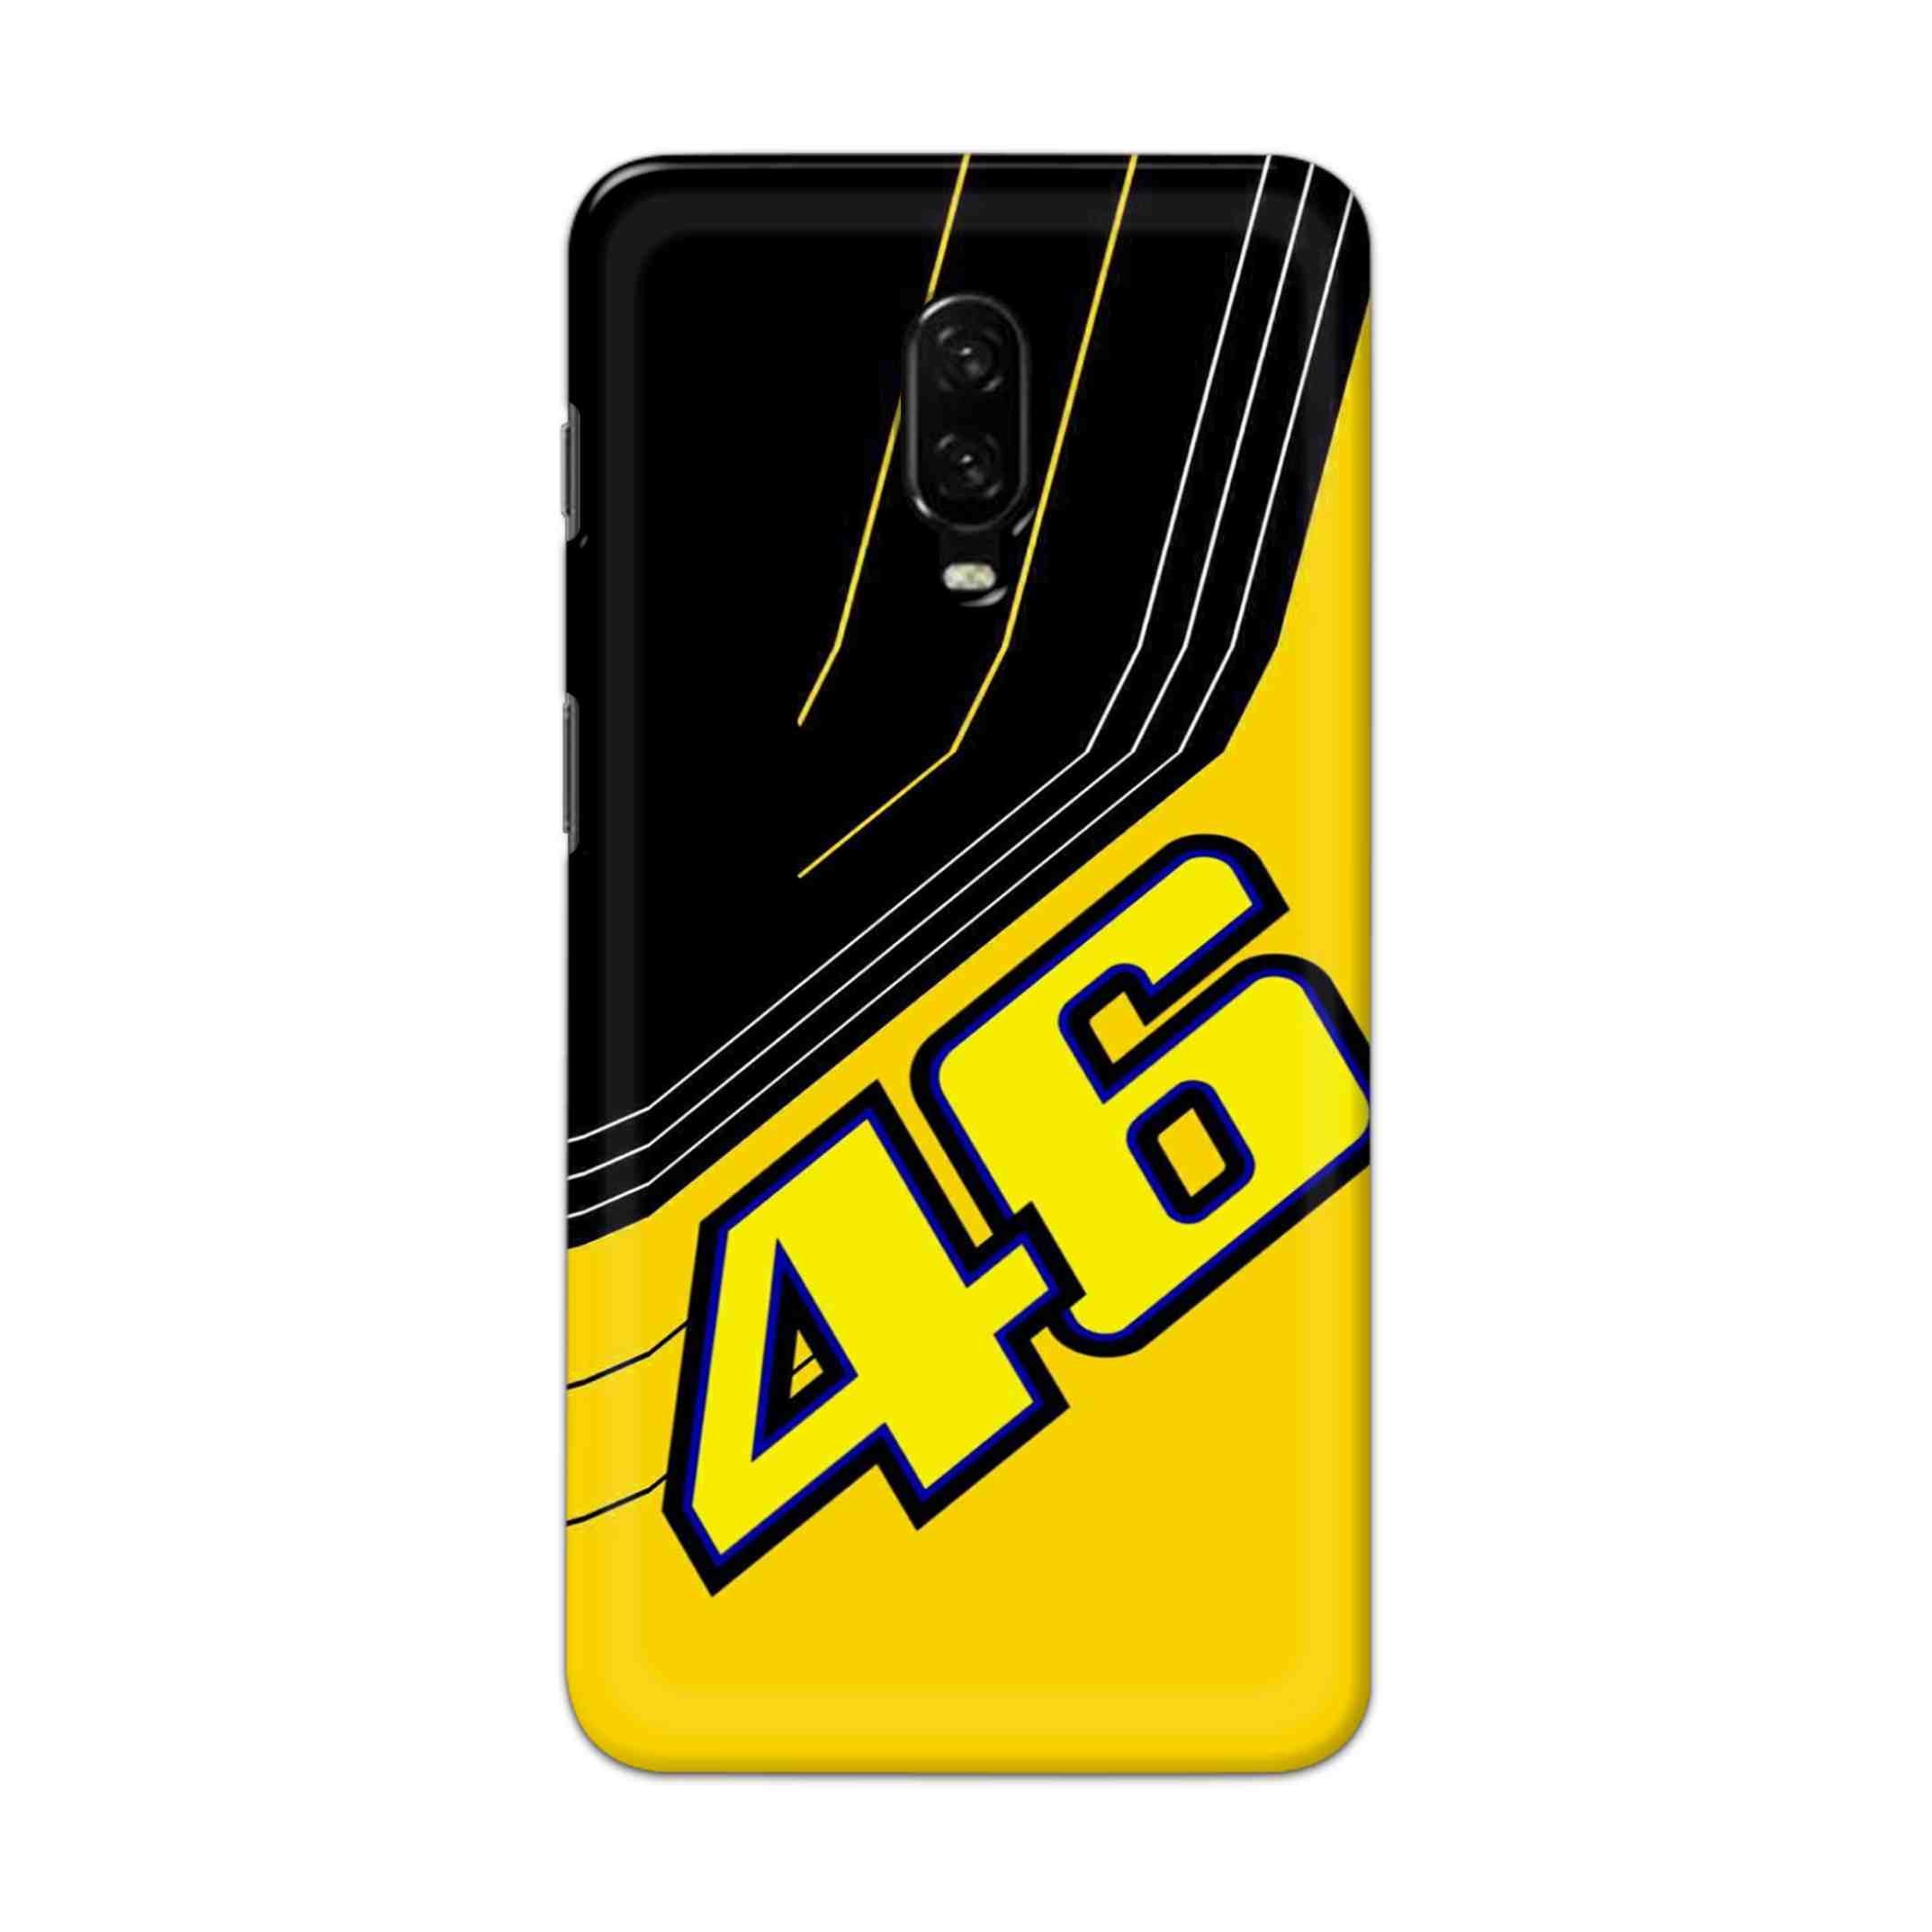 Buy 46 Hard Back Mobile Phone Case Cover For OnePlus 6T Online